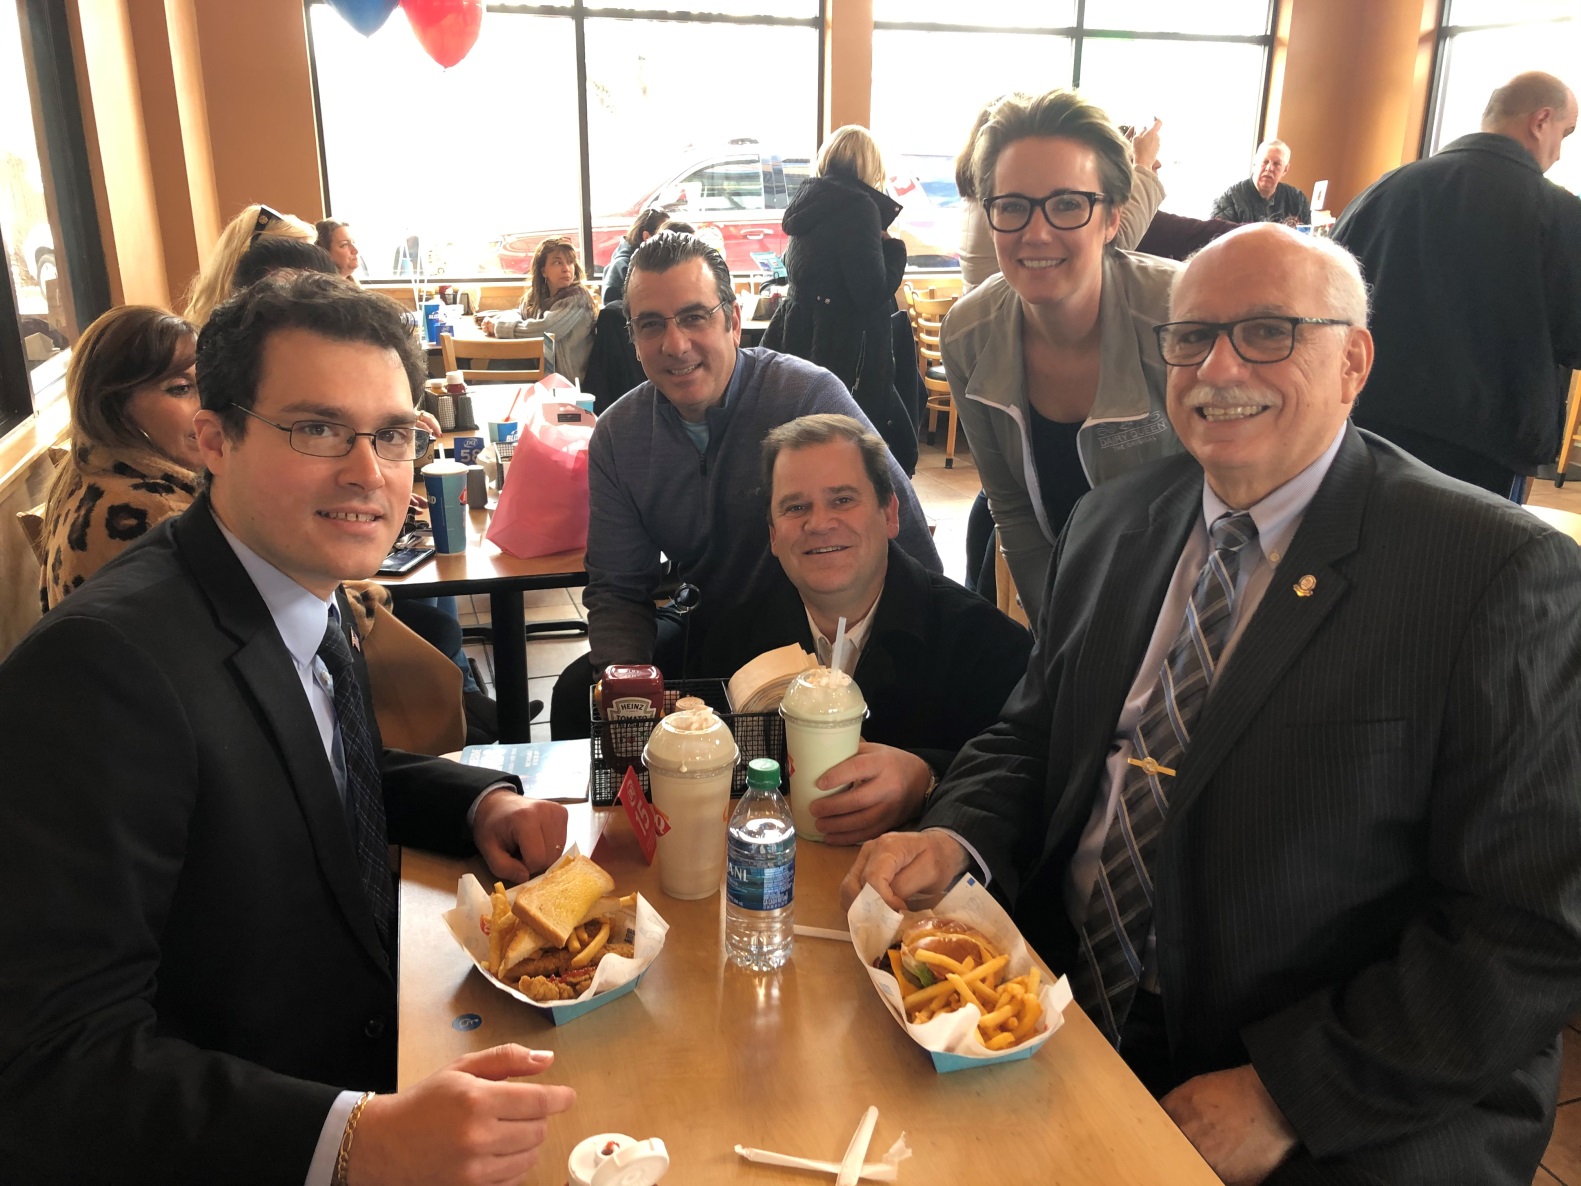 Assemblyman John Mikulin (R,C,I-Bethpage) joined (from left to right) Councilman Dennis Dunne, Jeff Pravato, receiver of taxes, Councilwoman Laura Maier and Dennis McGrath at the North Massapequa Fire Department fundraiser at DQ in Massapequa Park on Sund